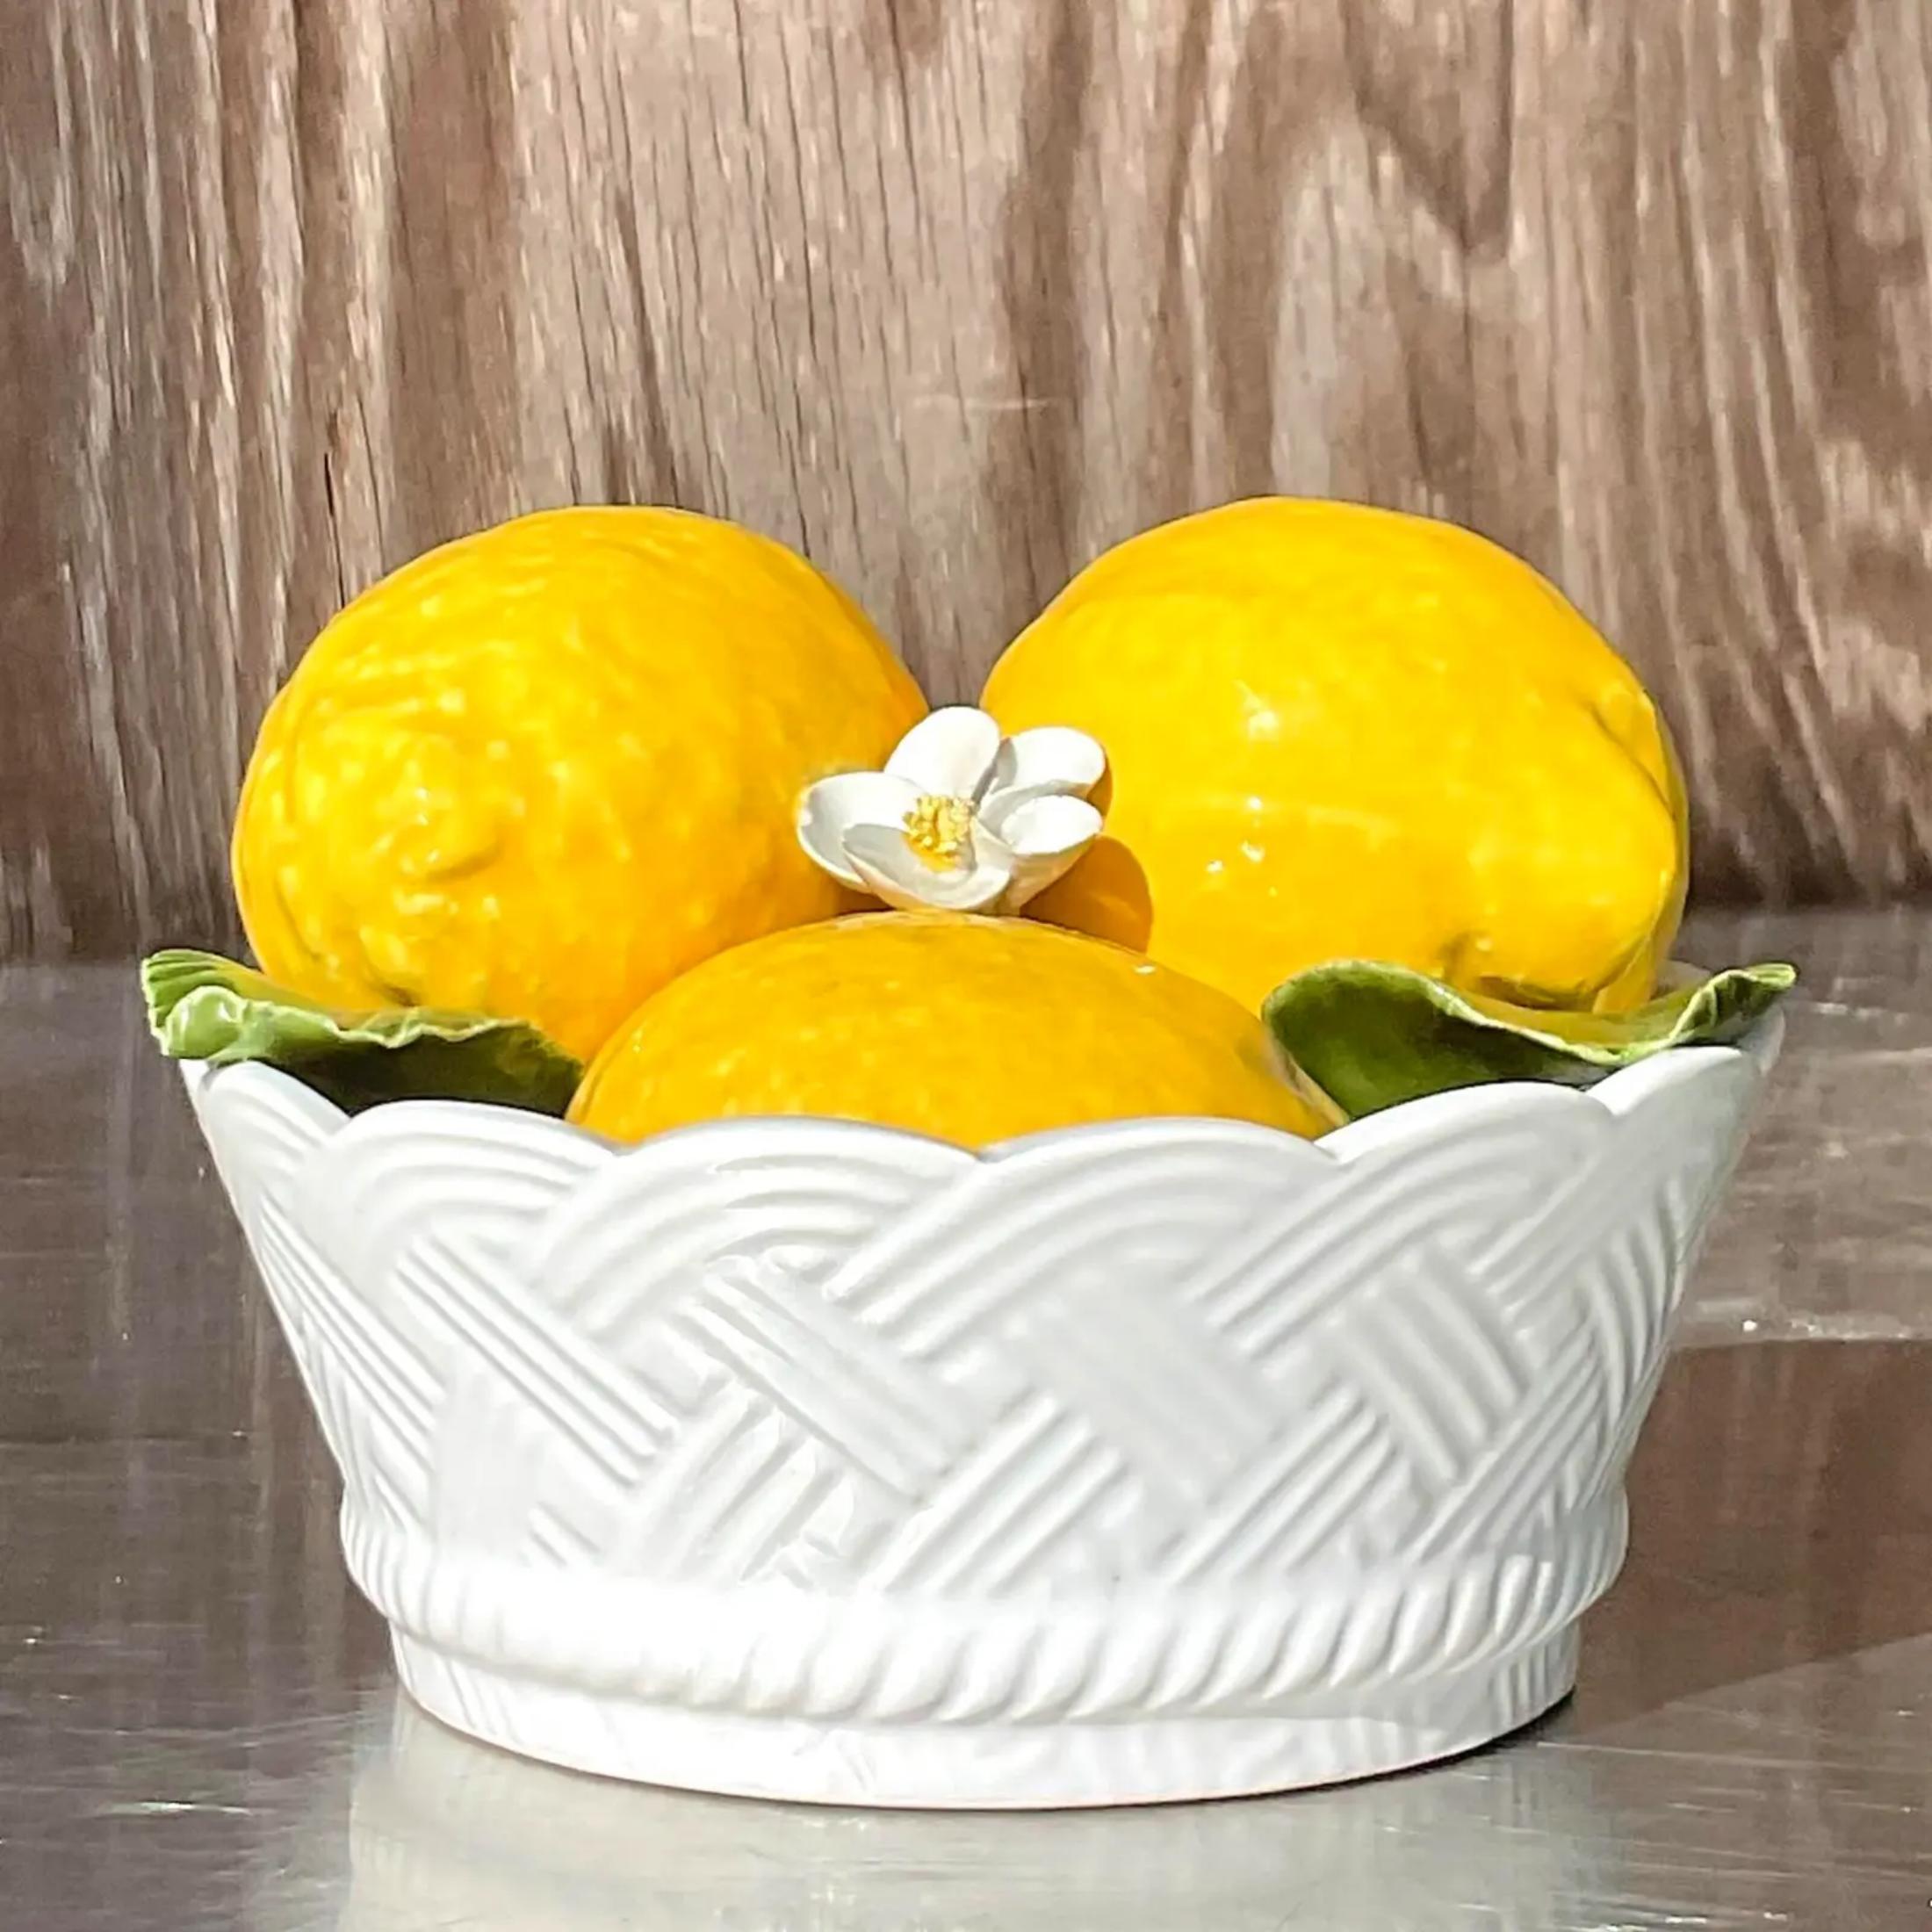 A gorgeous little glazed ceramic lemon bowl. Bright clear colors dominate this piece. Signed made in Italy on the bottom. Acquired from a Pal Beach estate.